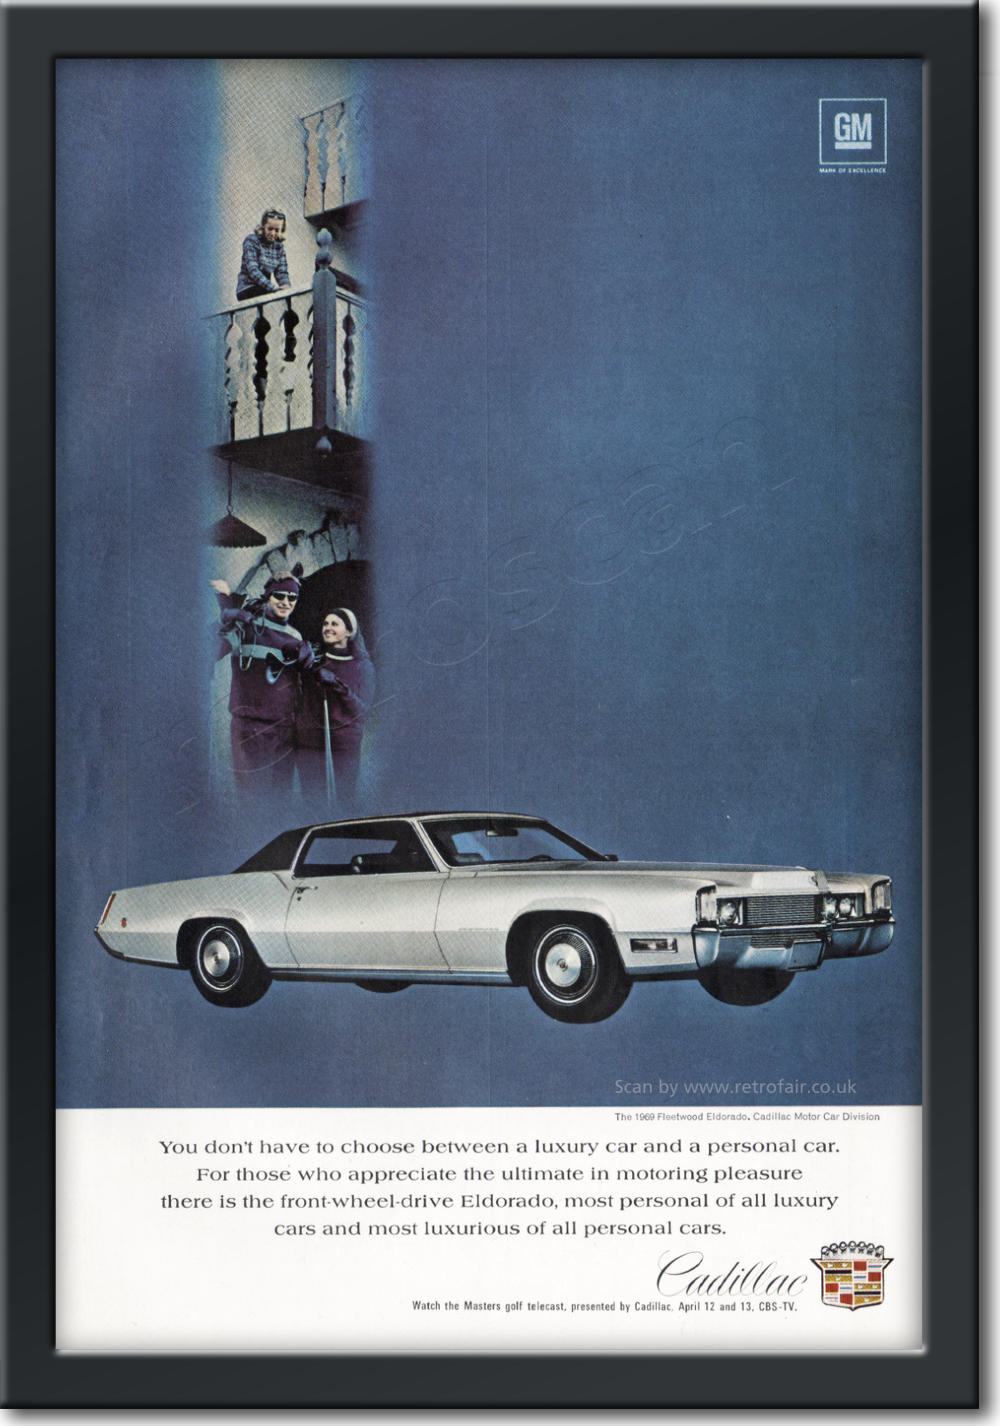 1969 Cadillac - framed preview vintage ad